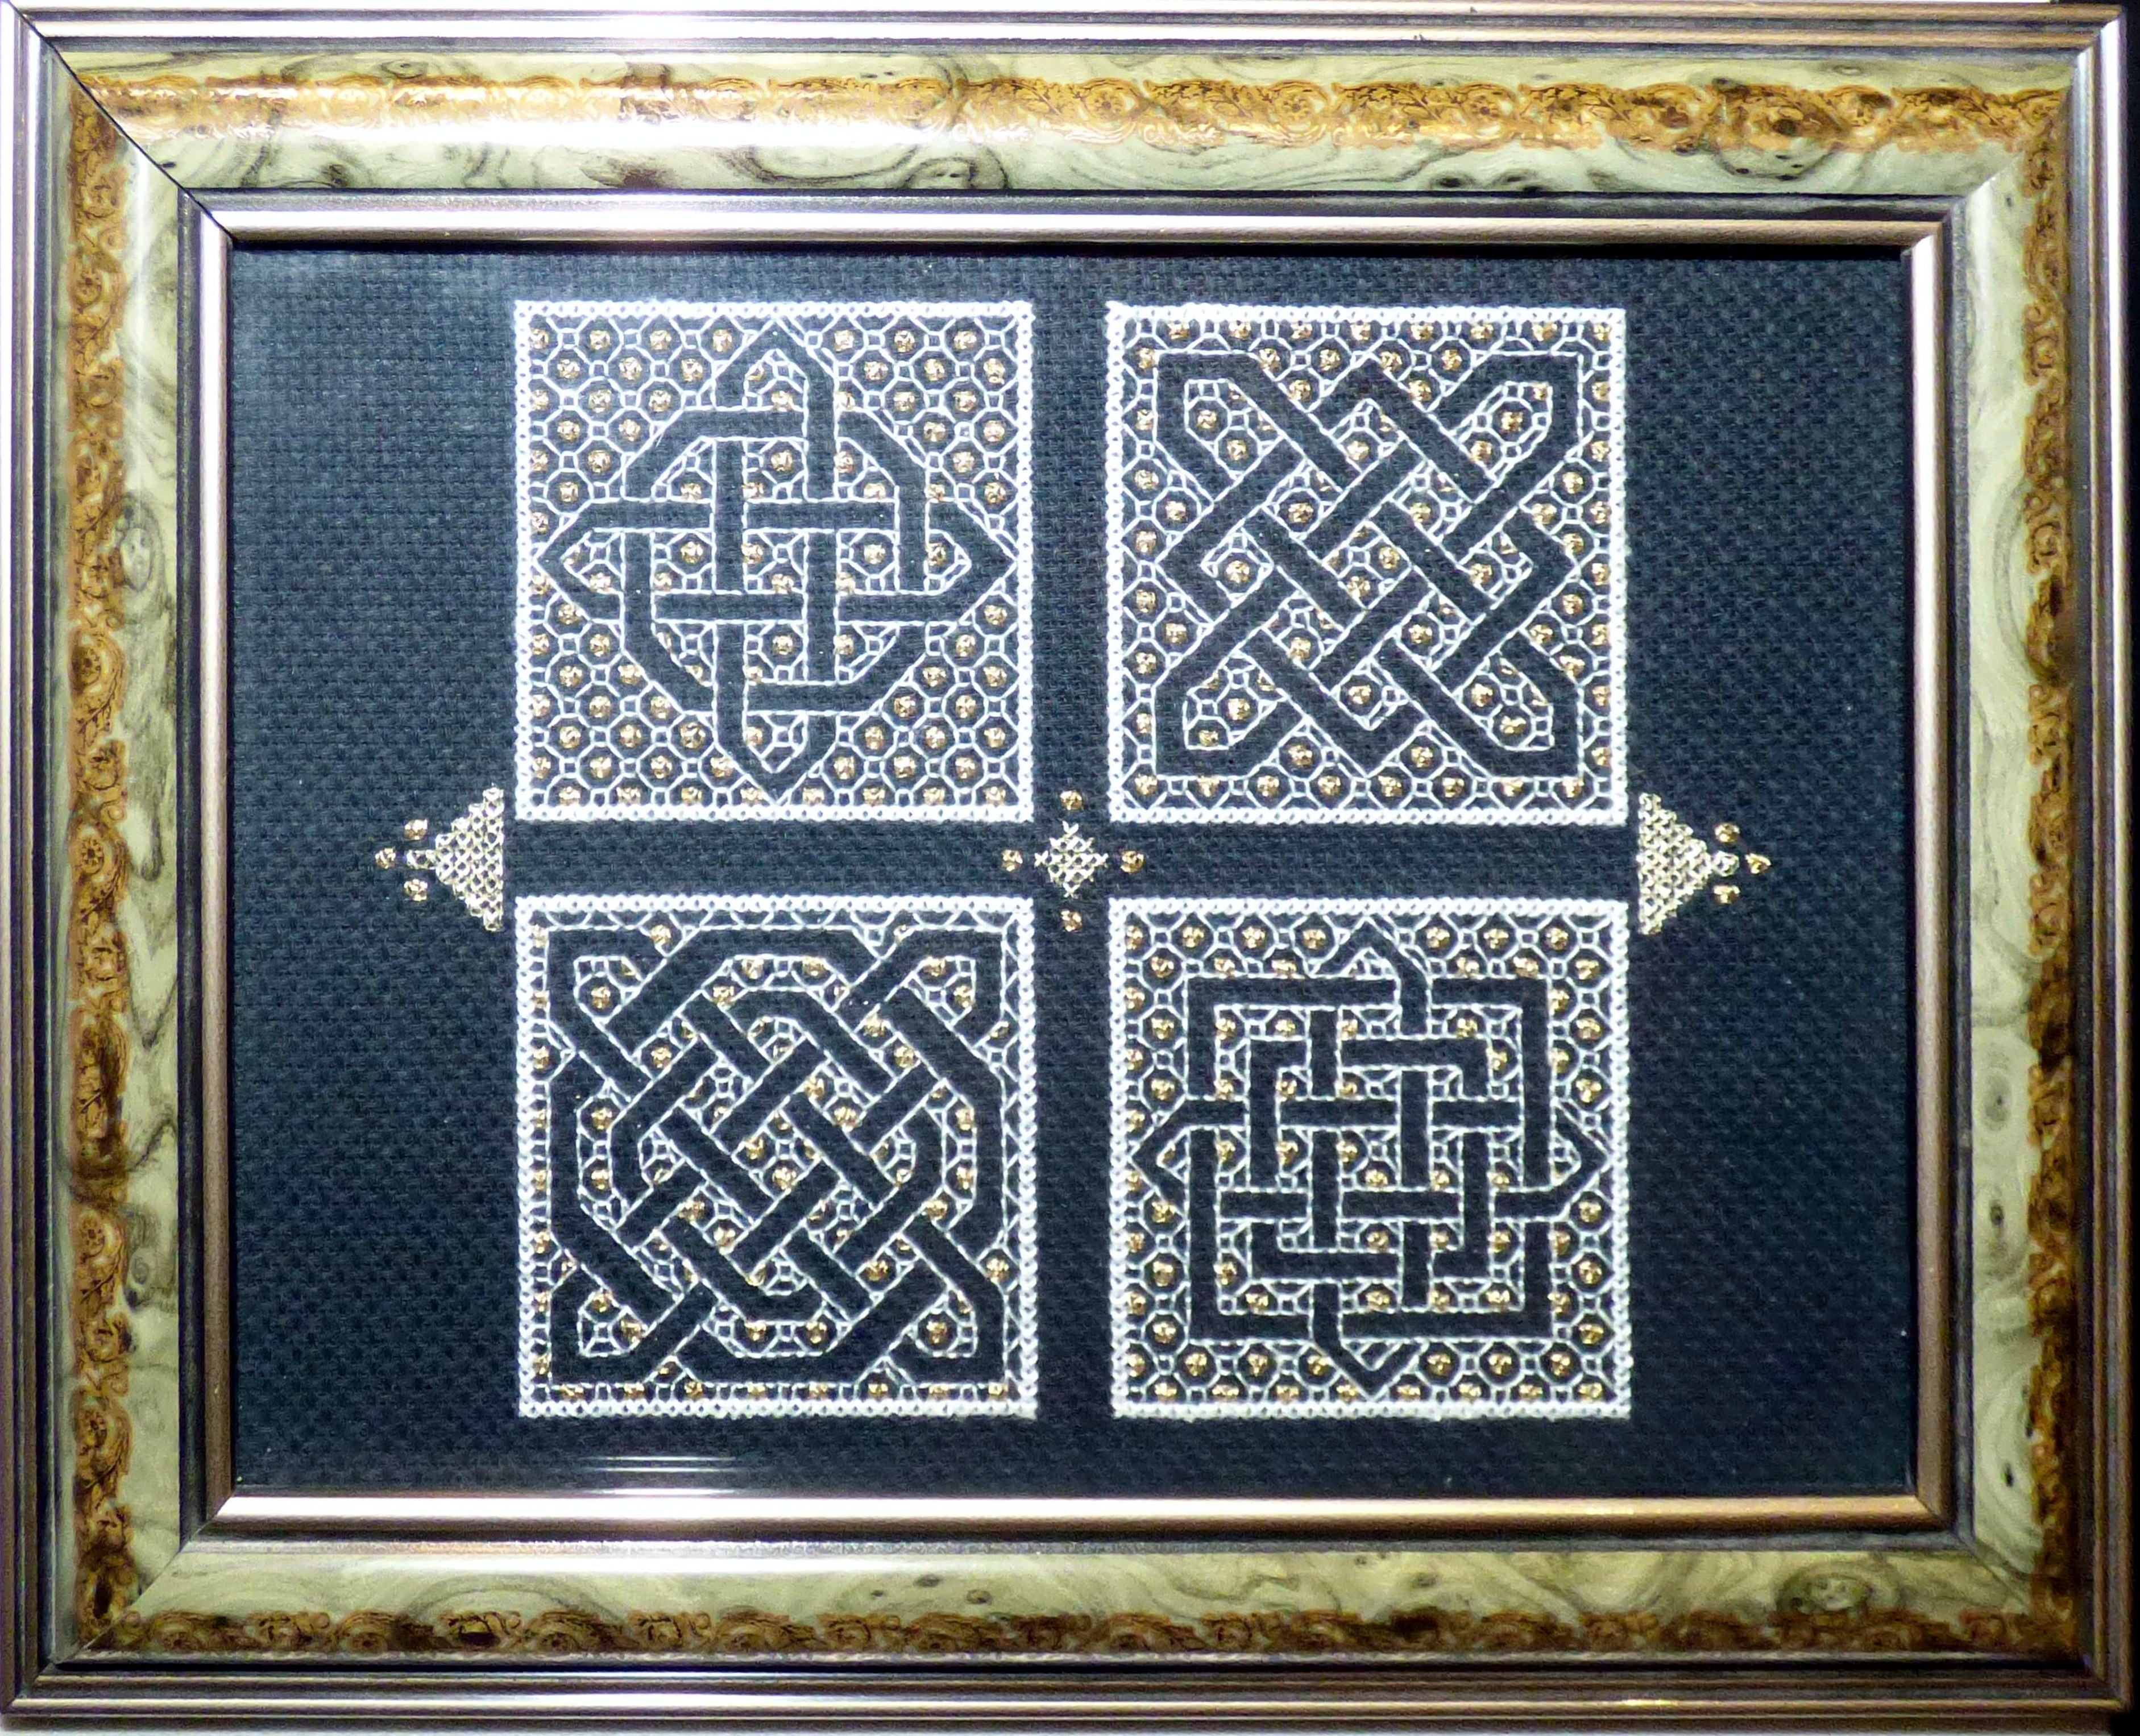 FOUR CELTIC KNOTS by Eileen Sampson, blackwork, Exhibition at All Hallows Church, September 2022